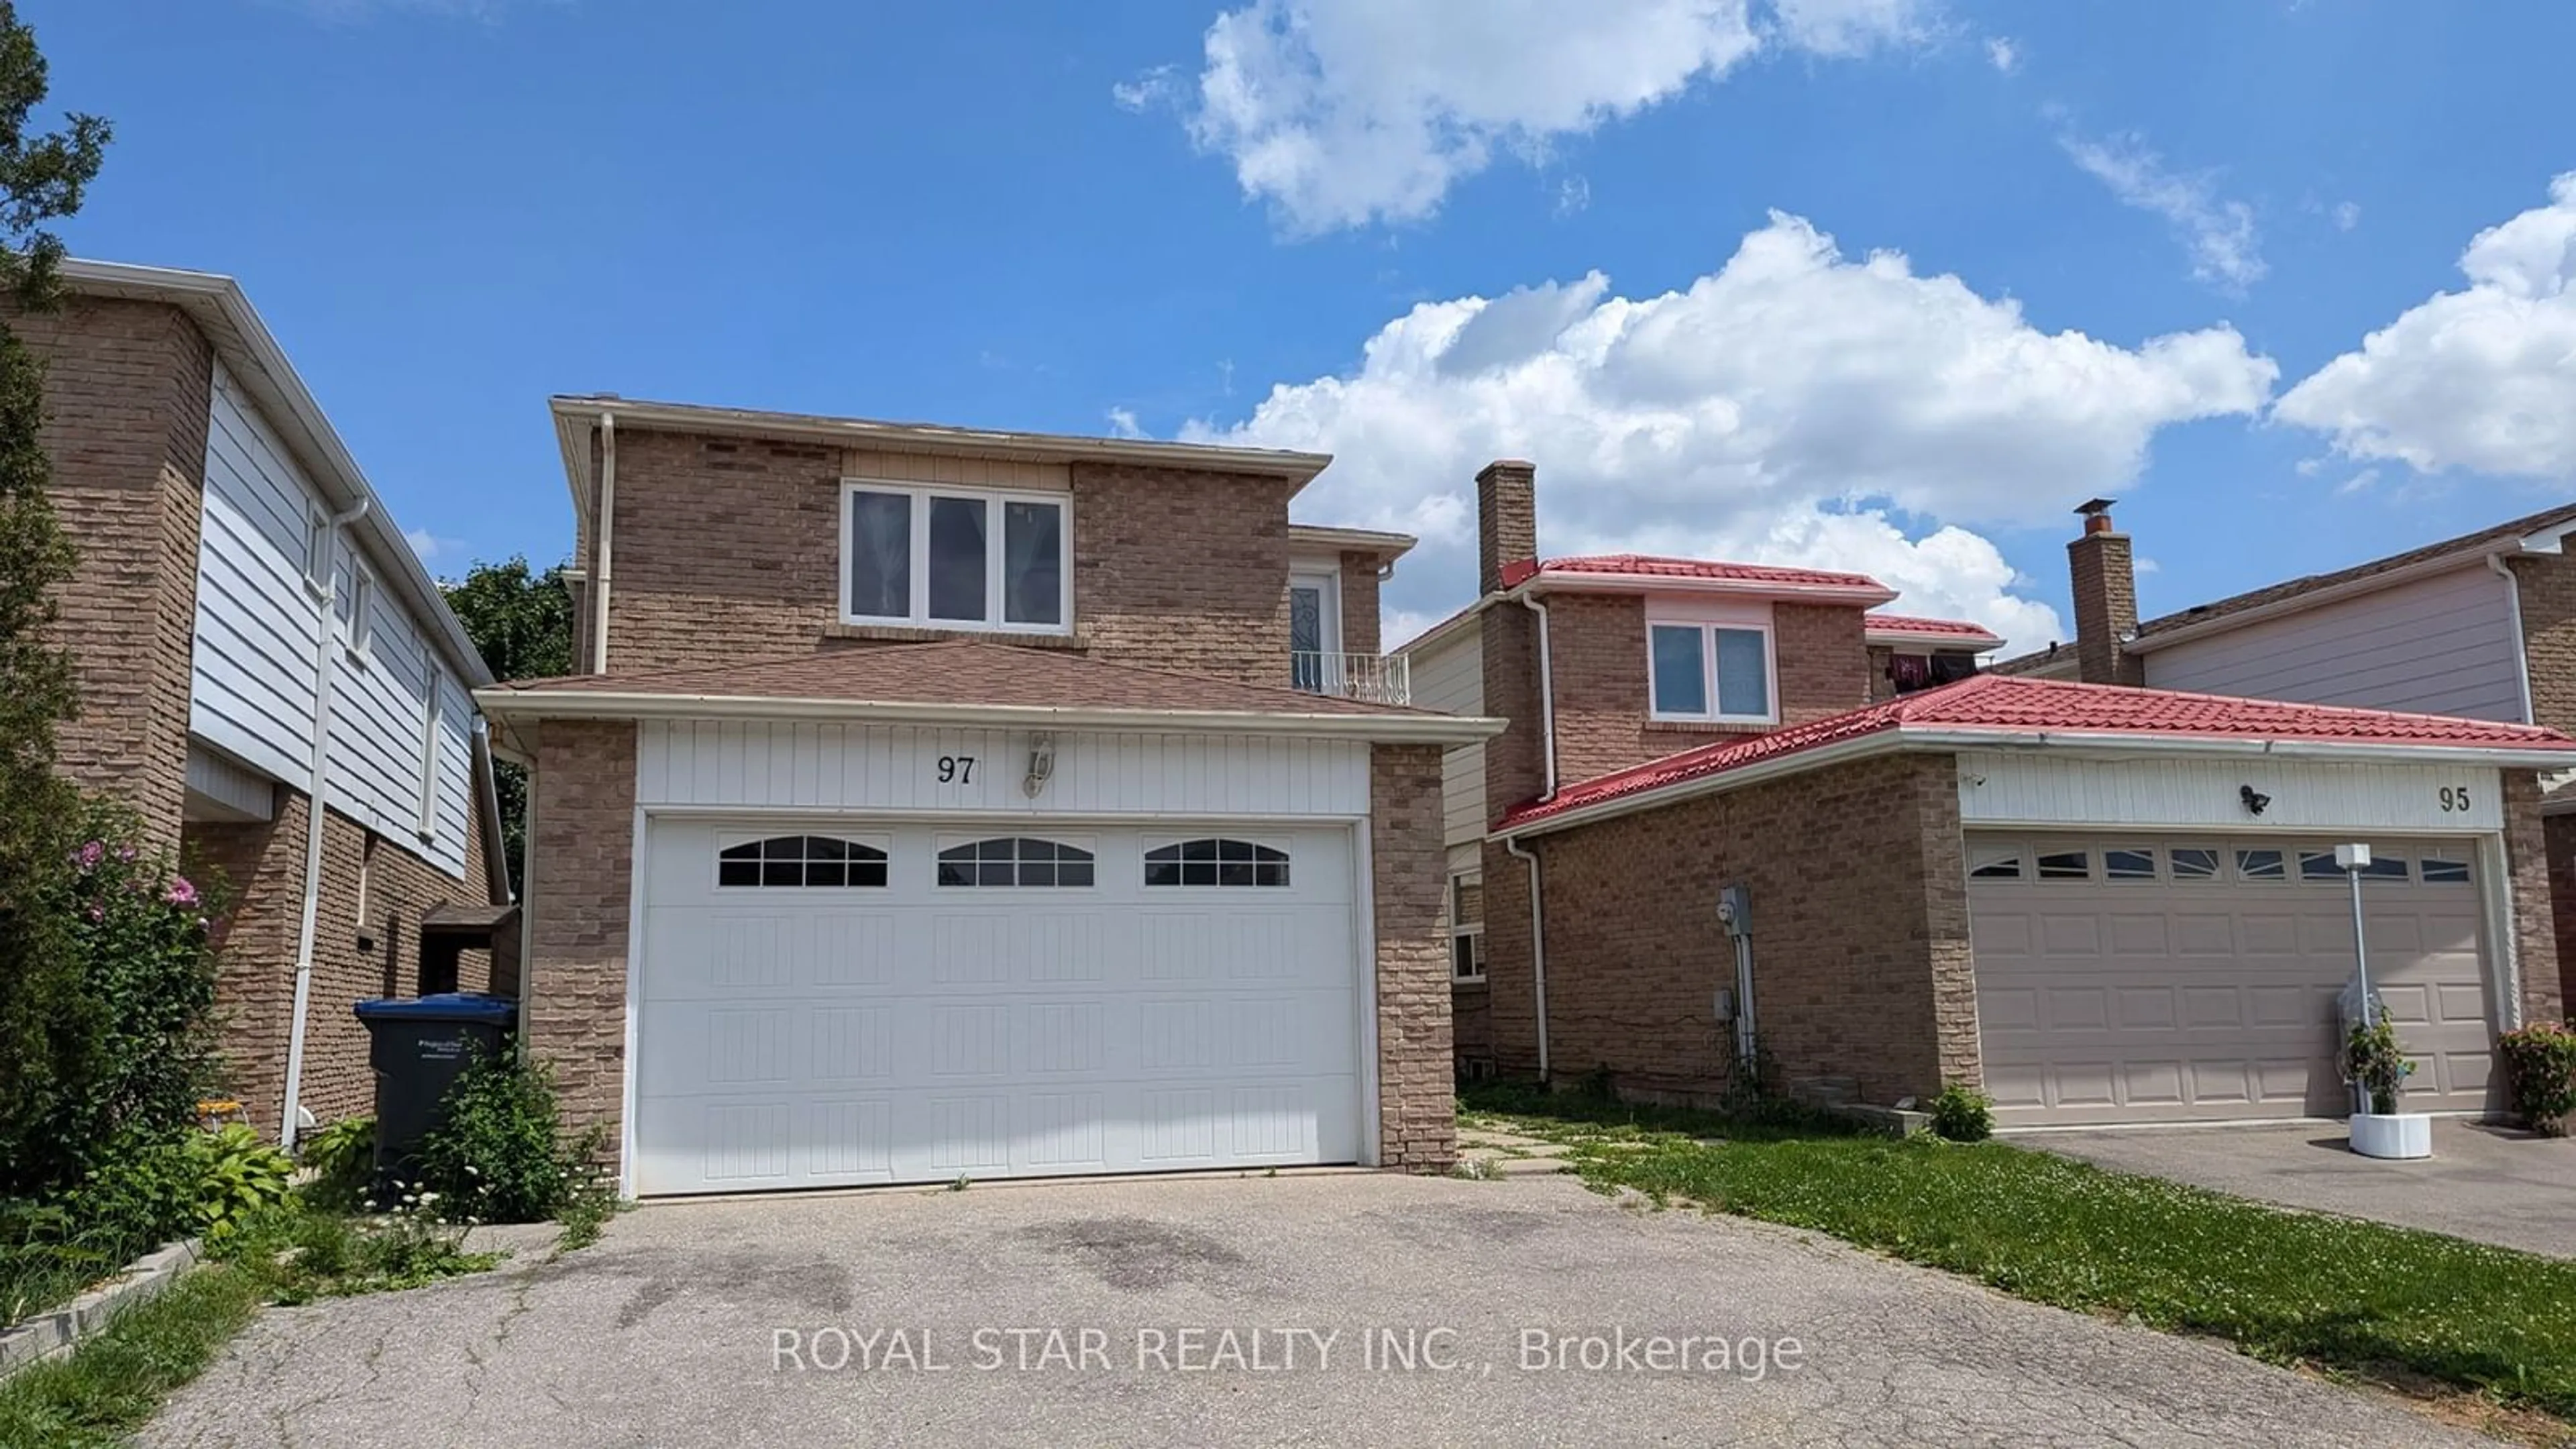 Frontside or backside of a home for 97 Banting Cres, Brampton Ontario L6Y 2L9